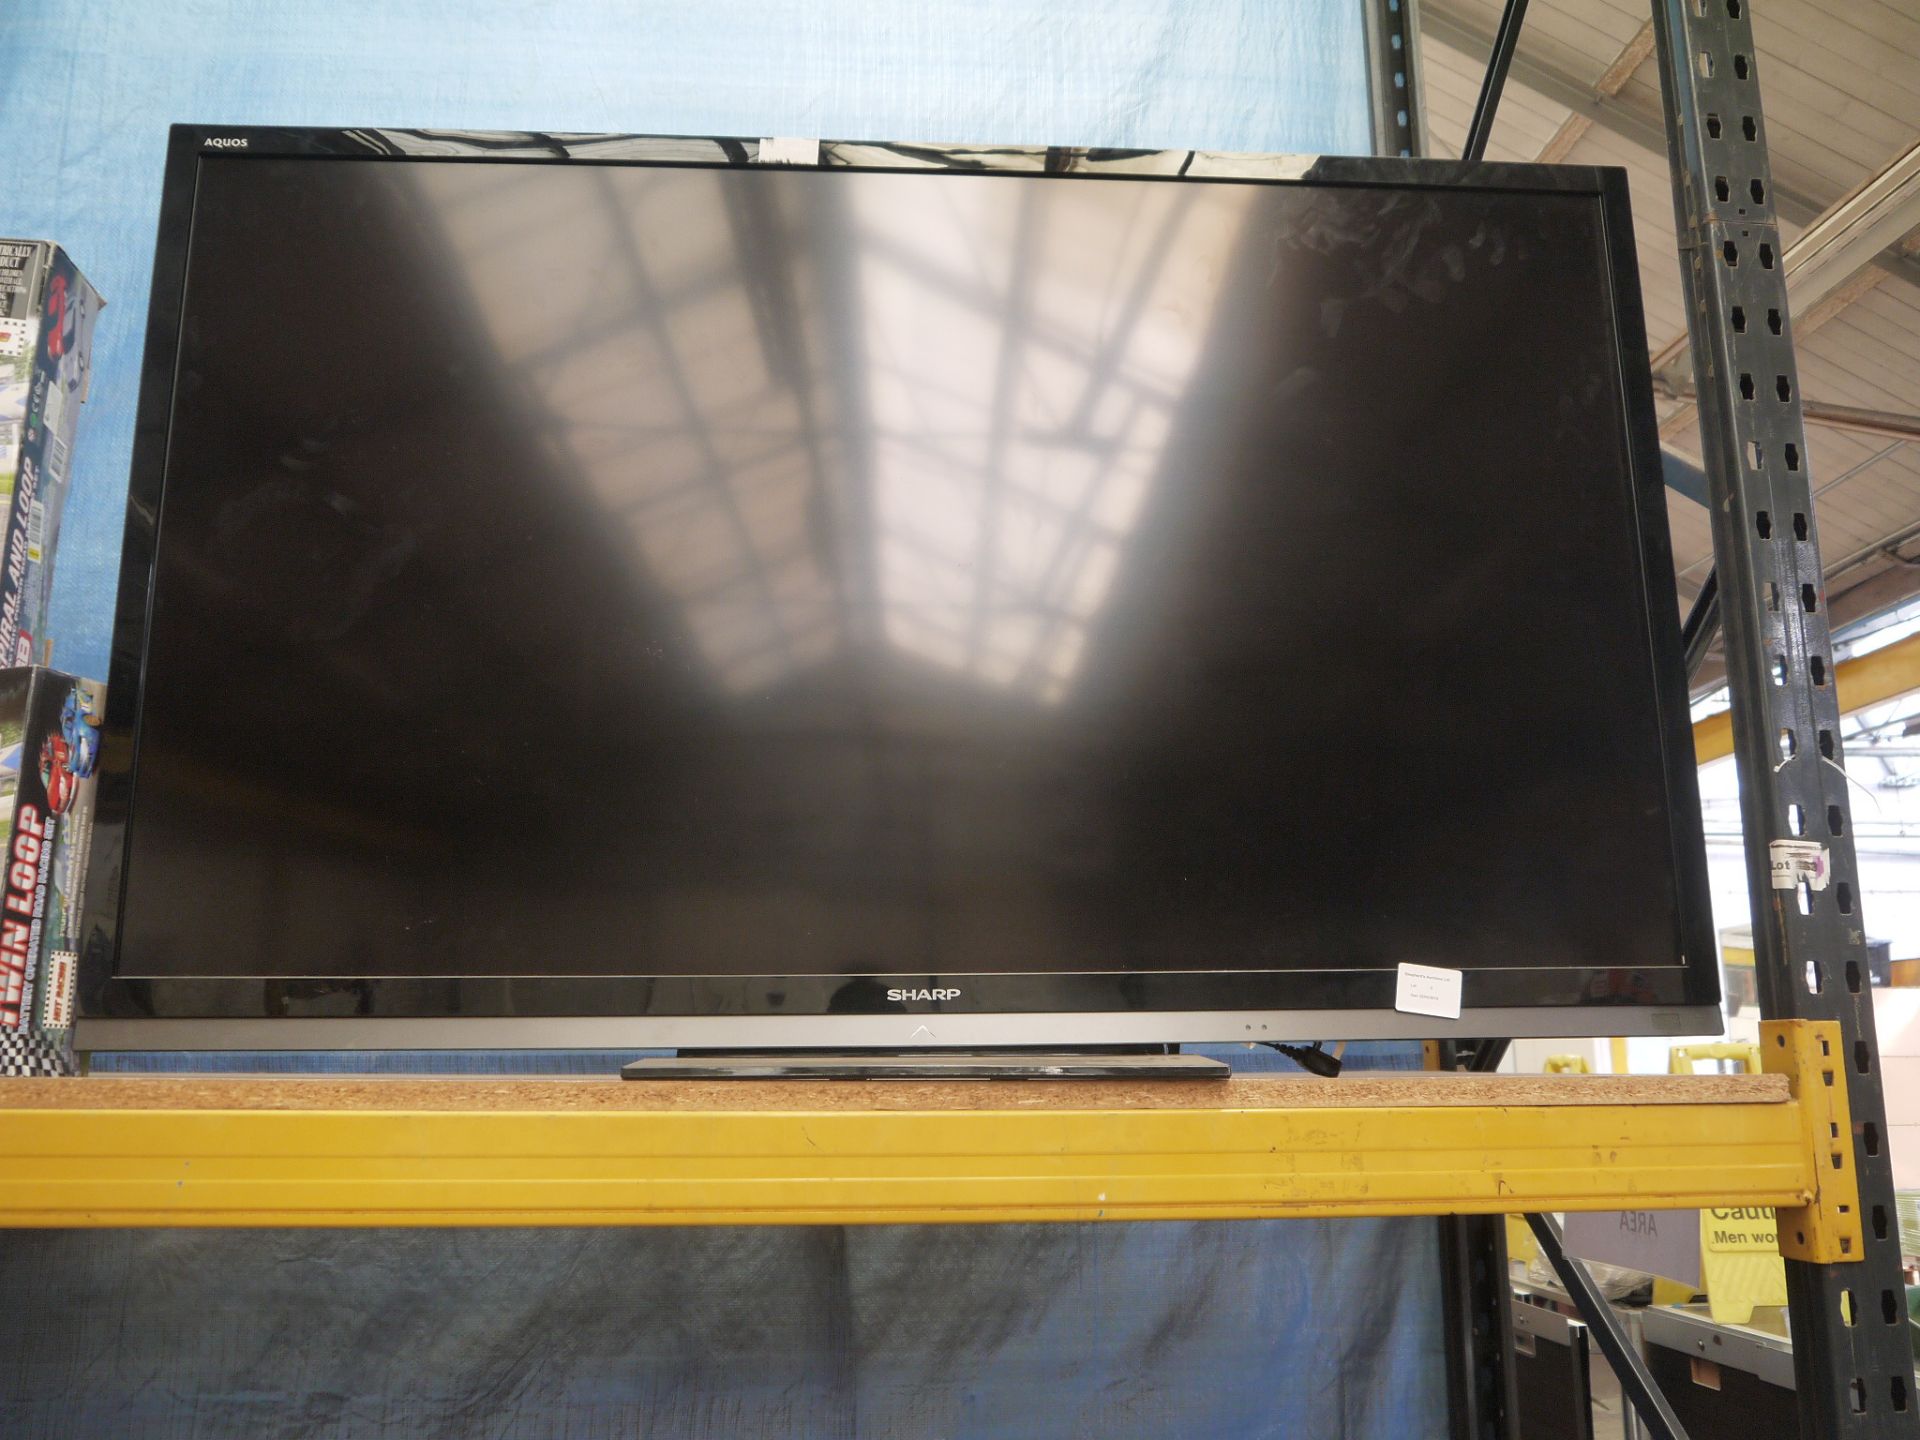 Sharp Aquos 70'' LCD TV. No Power when plugged in